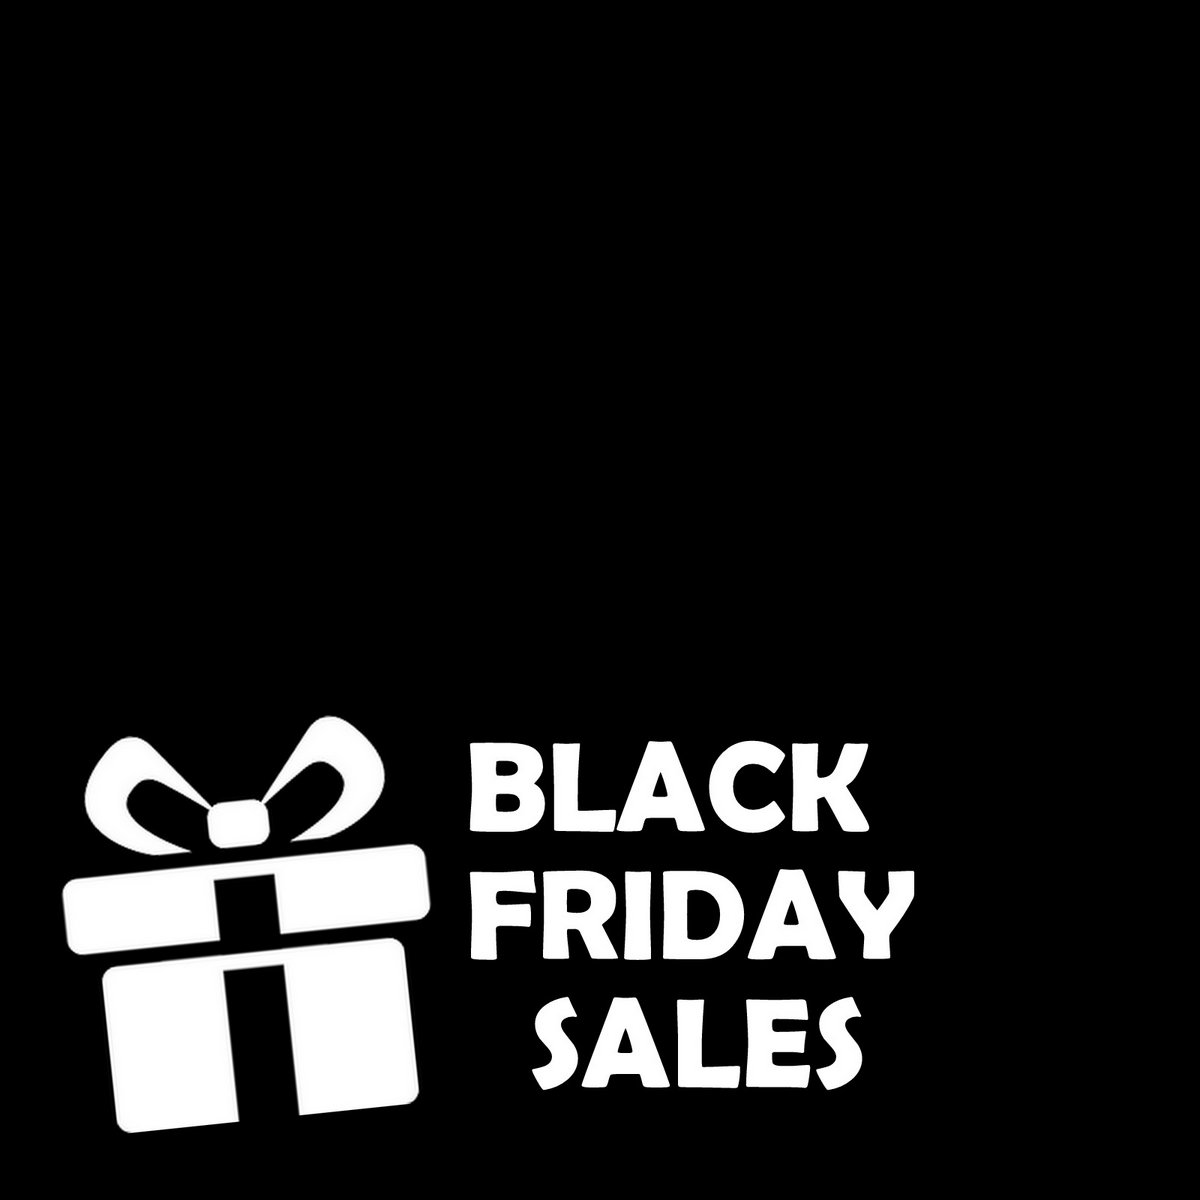 black and white image of a present and text: black friday sales